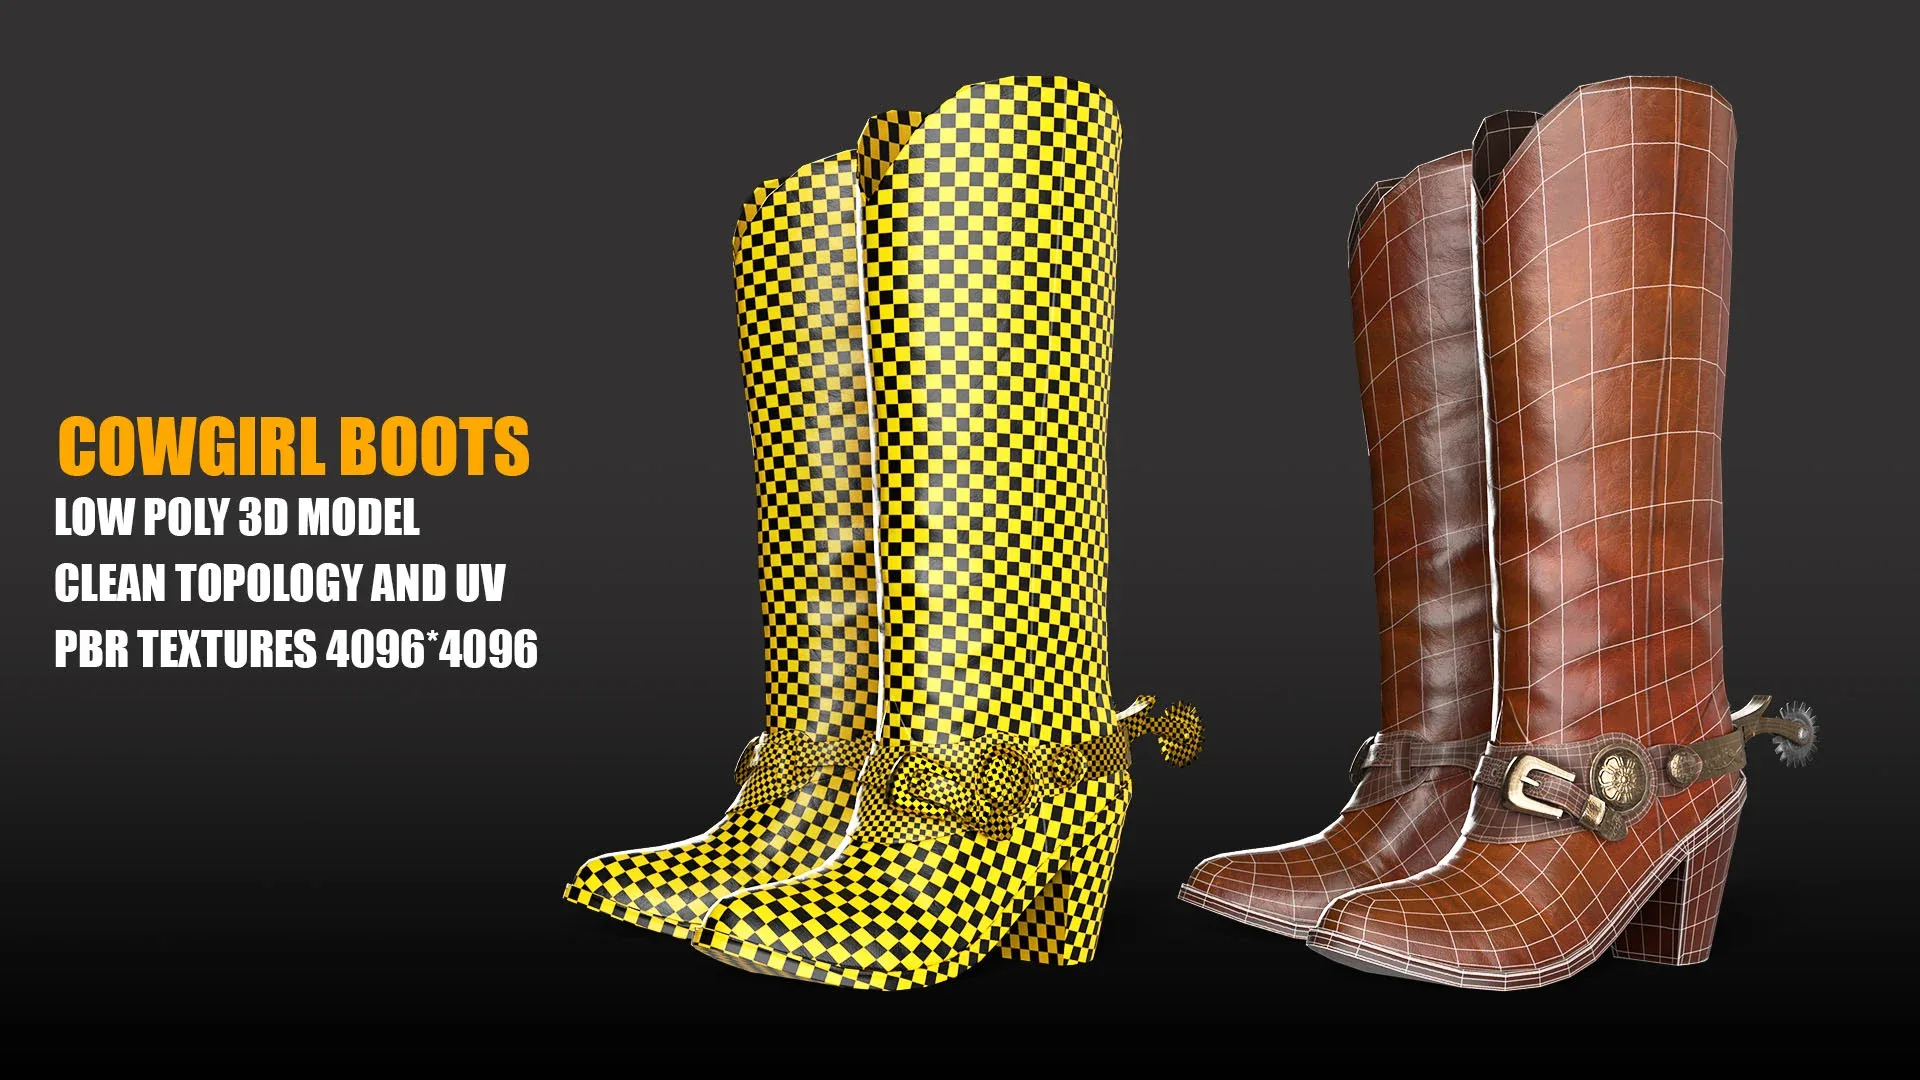 Leather Cowgirl Boots Low-poly 3D model PBR Textures